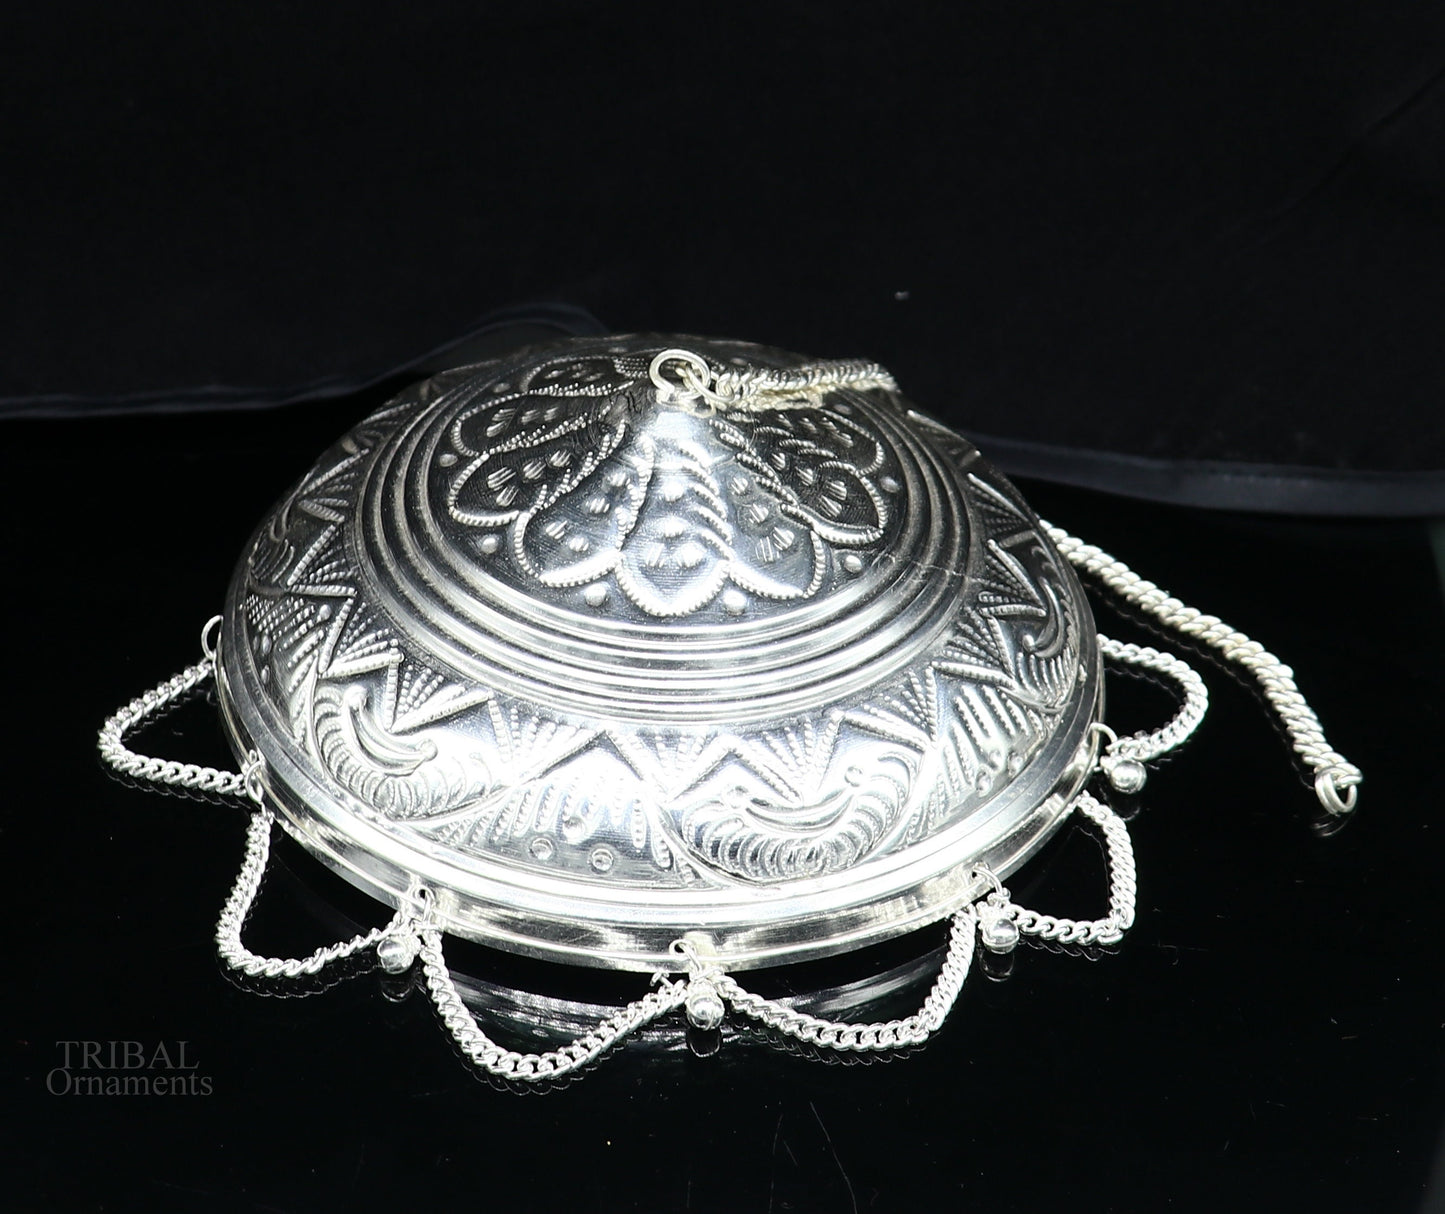 Solid Silver god chattar or chhatra, silver umbrella god temple art, hand craved sterling silver temple article, temple utensils su633 - TRIBAL ORNAMENTS